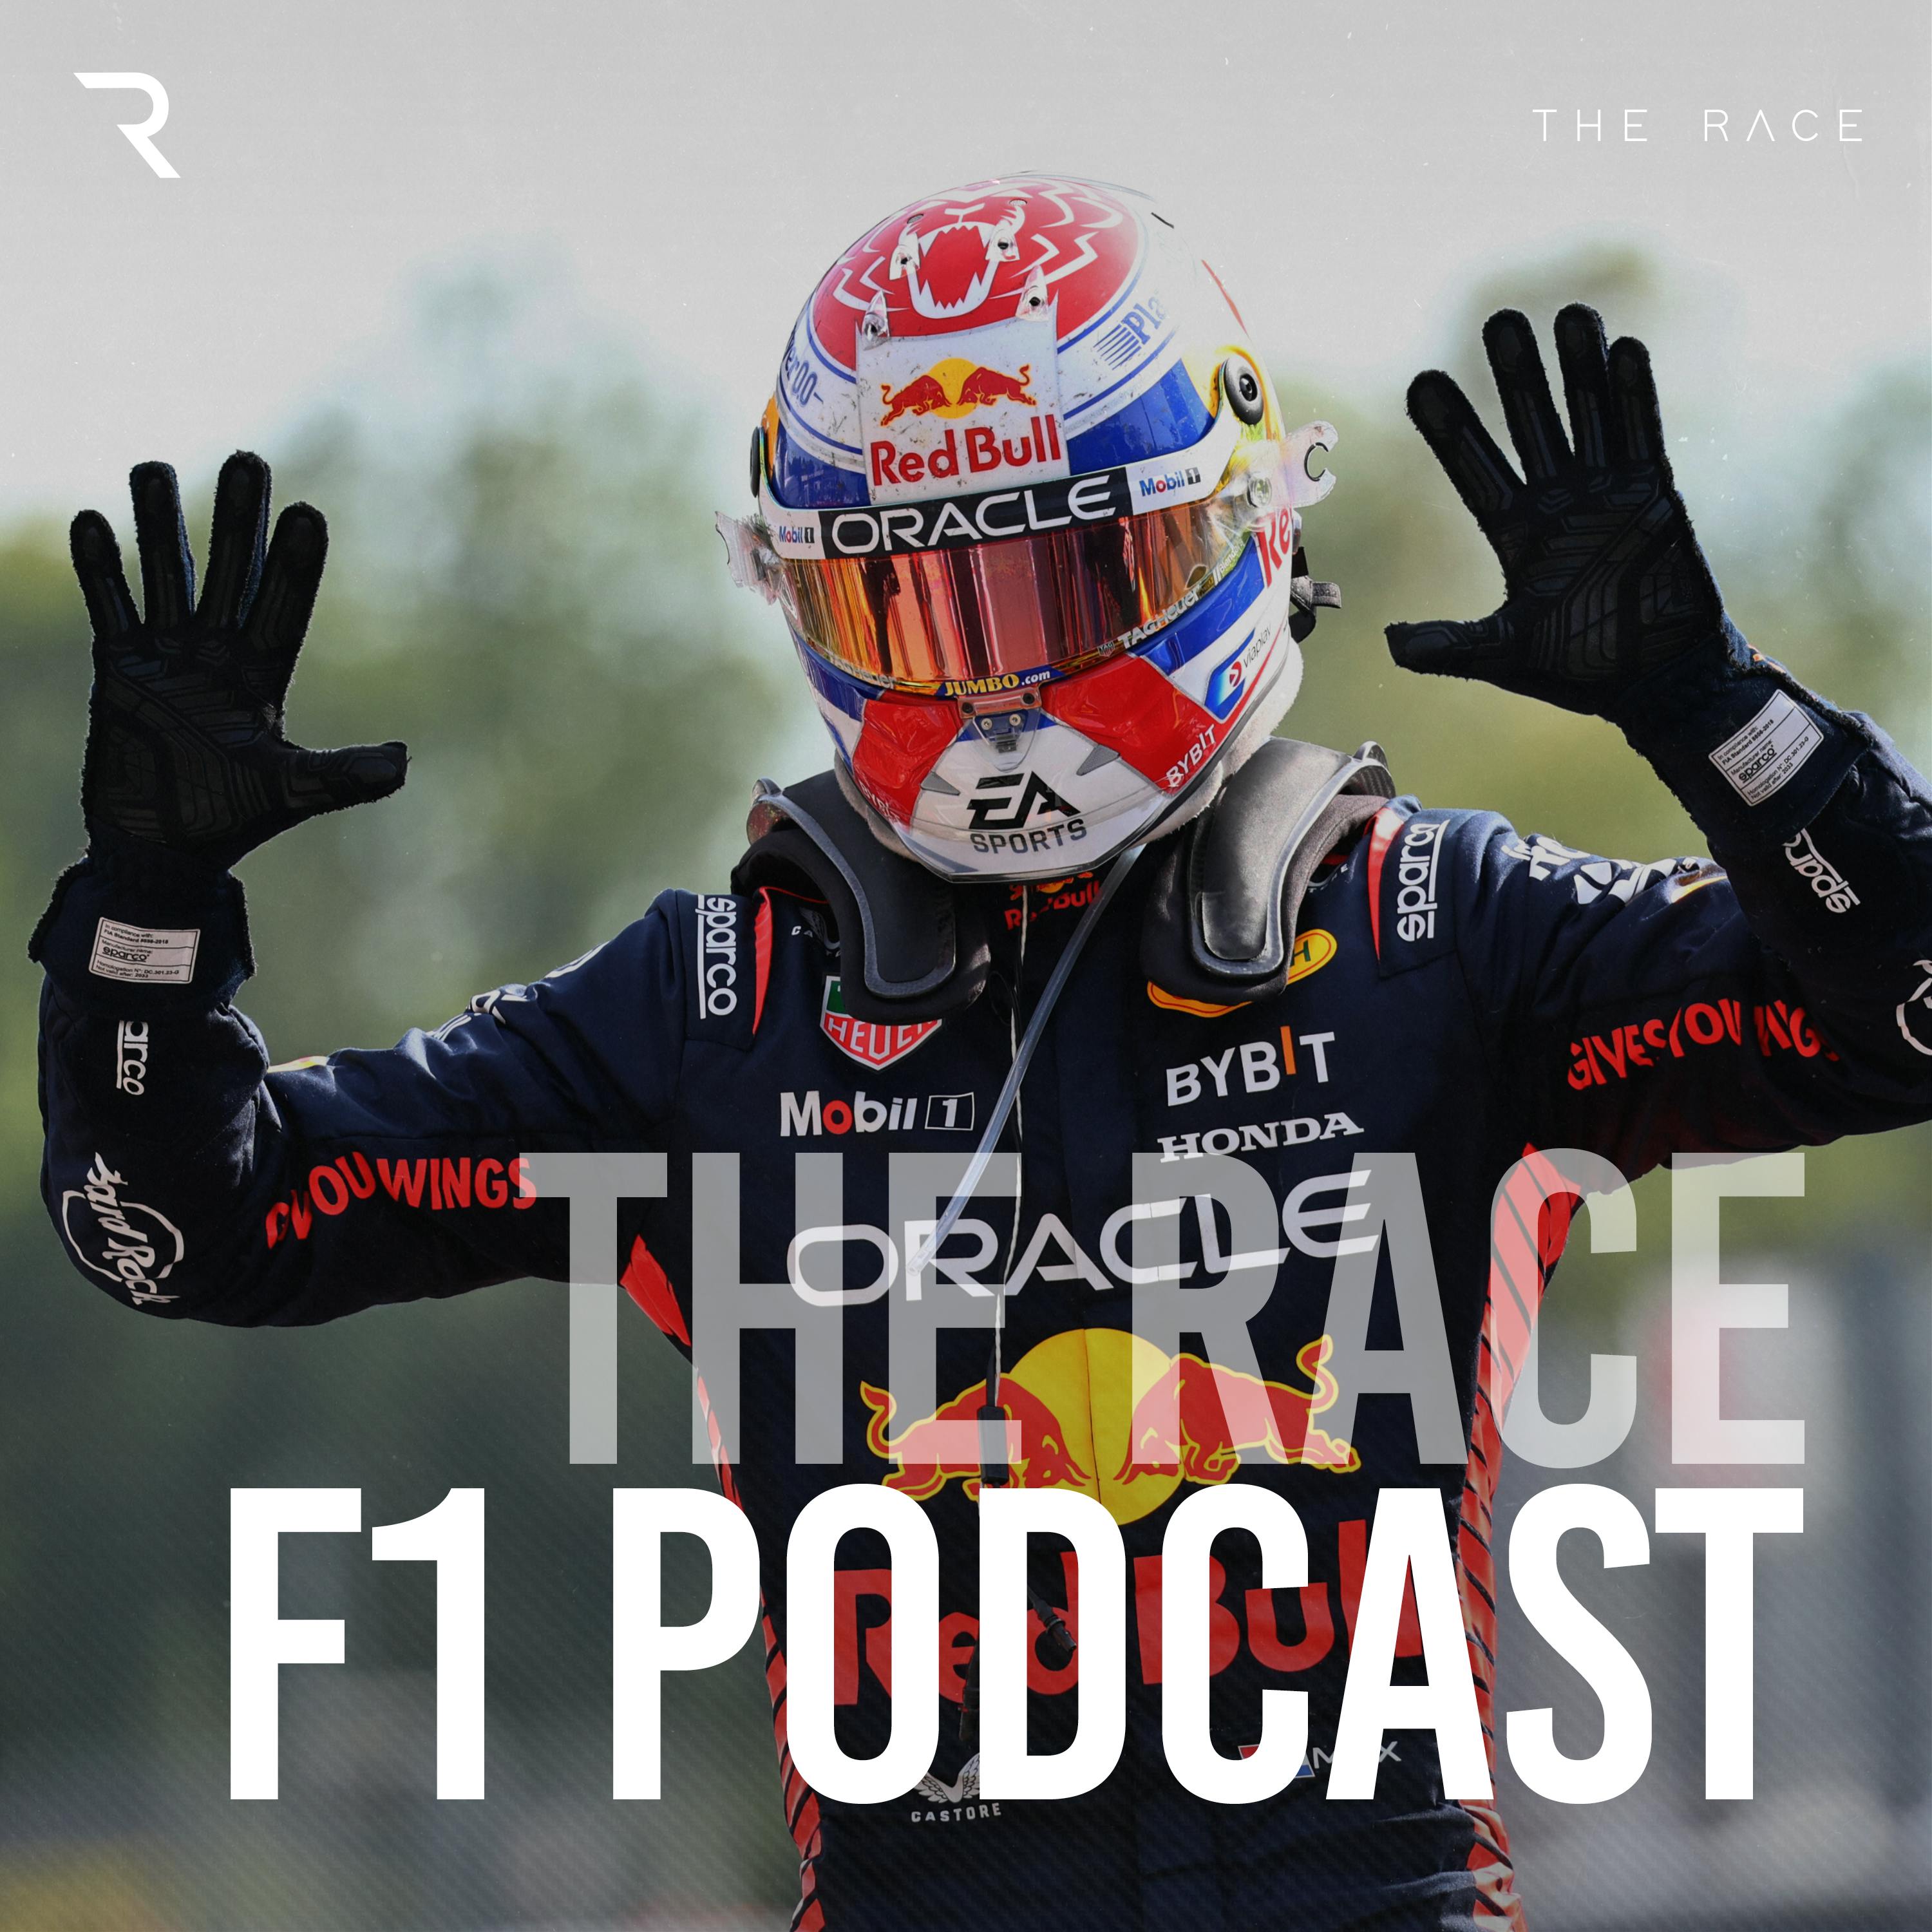 Could Verstappen's rivals do what he's doing in the Red Bull?